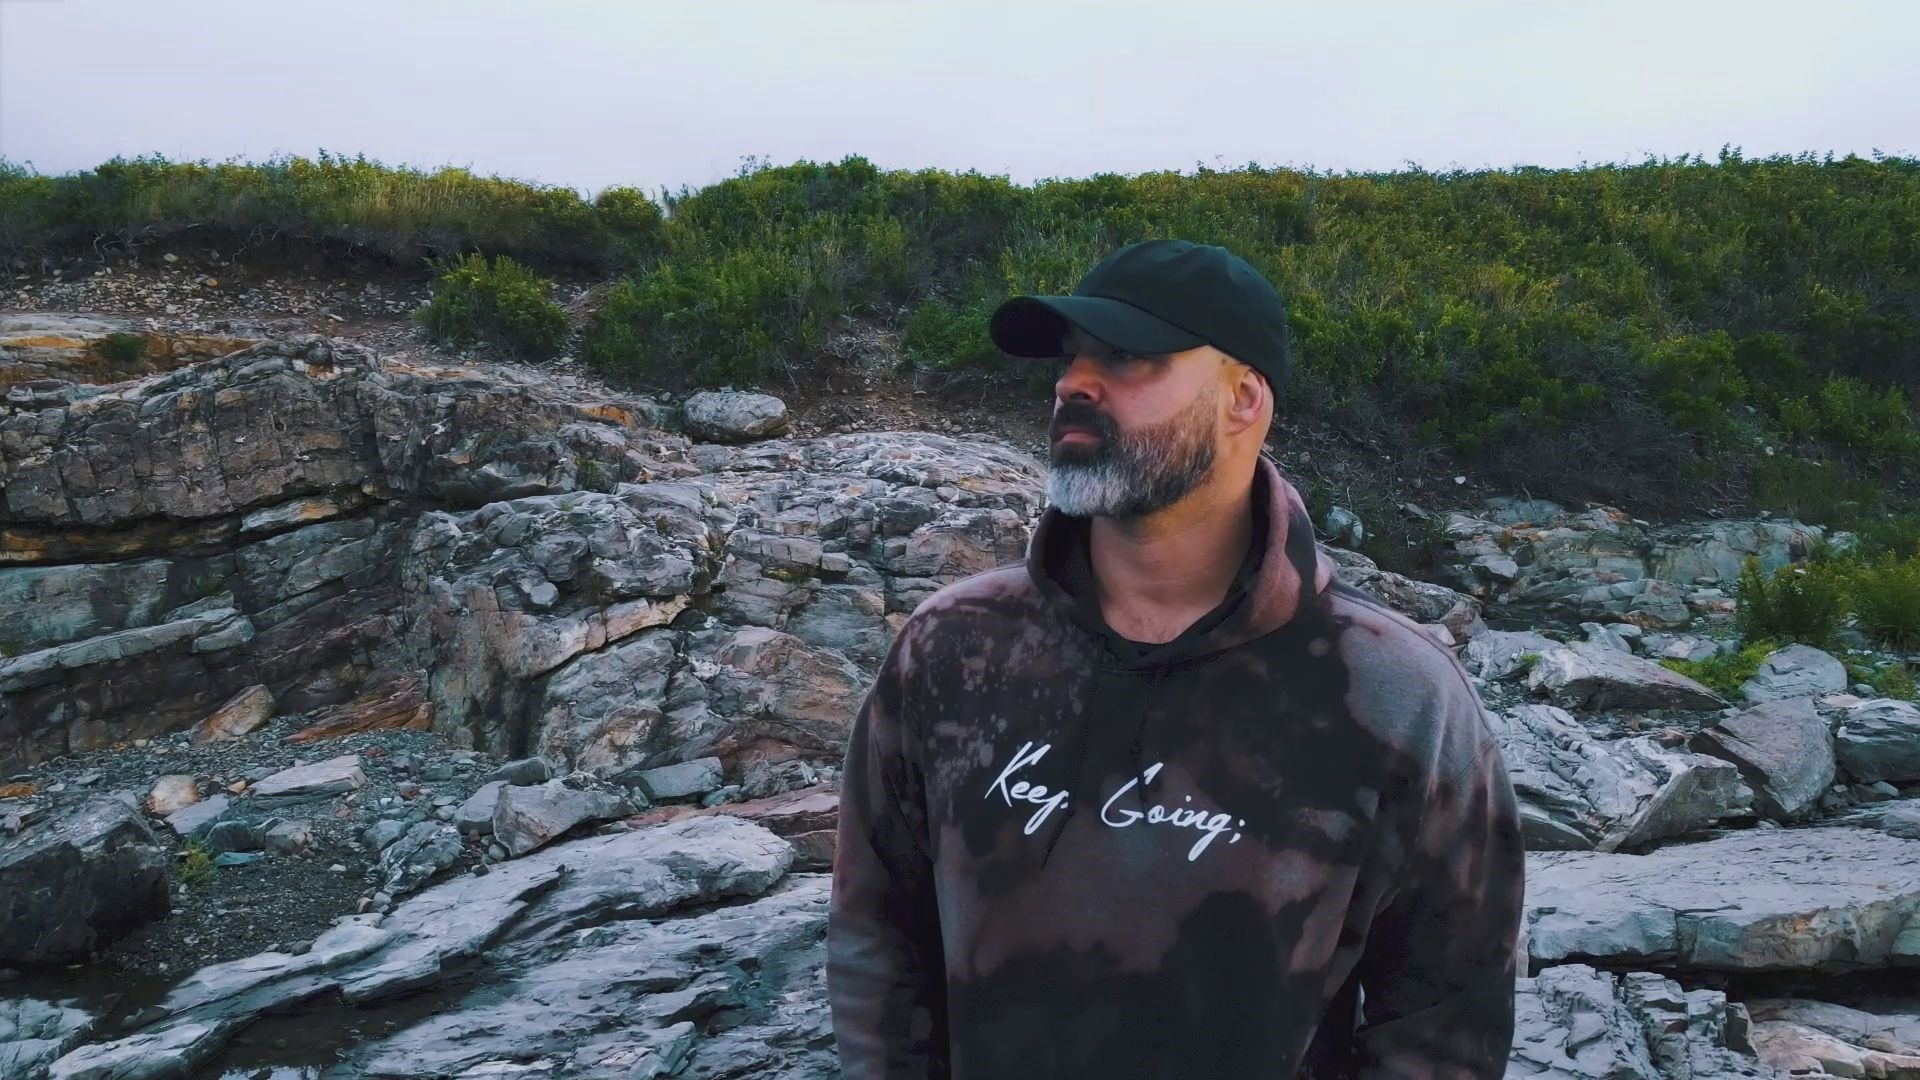 He thought suicide was the answer. Now, Kyle Poissonnier is using his own struggles and clothing brand to help change the conversations around mental health.